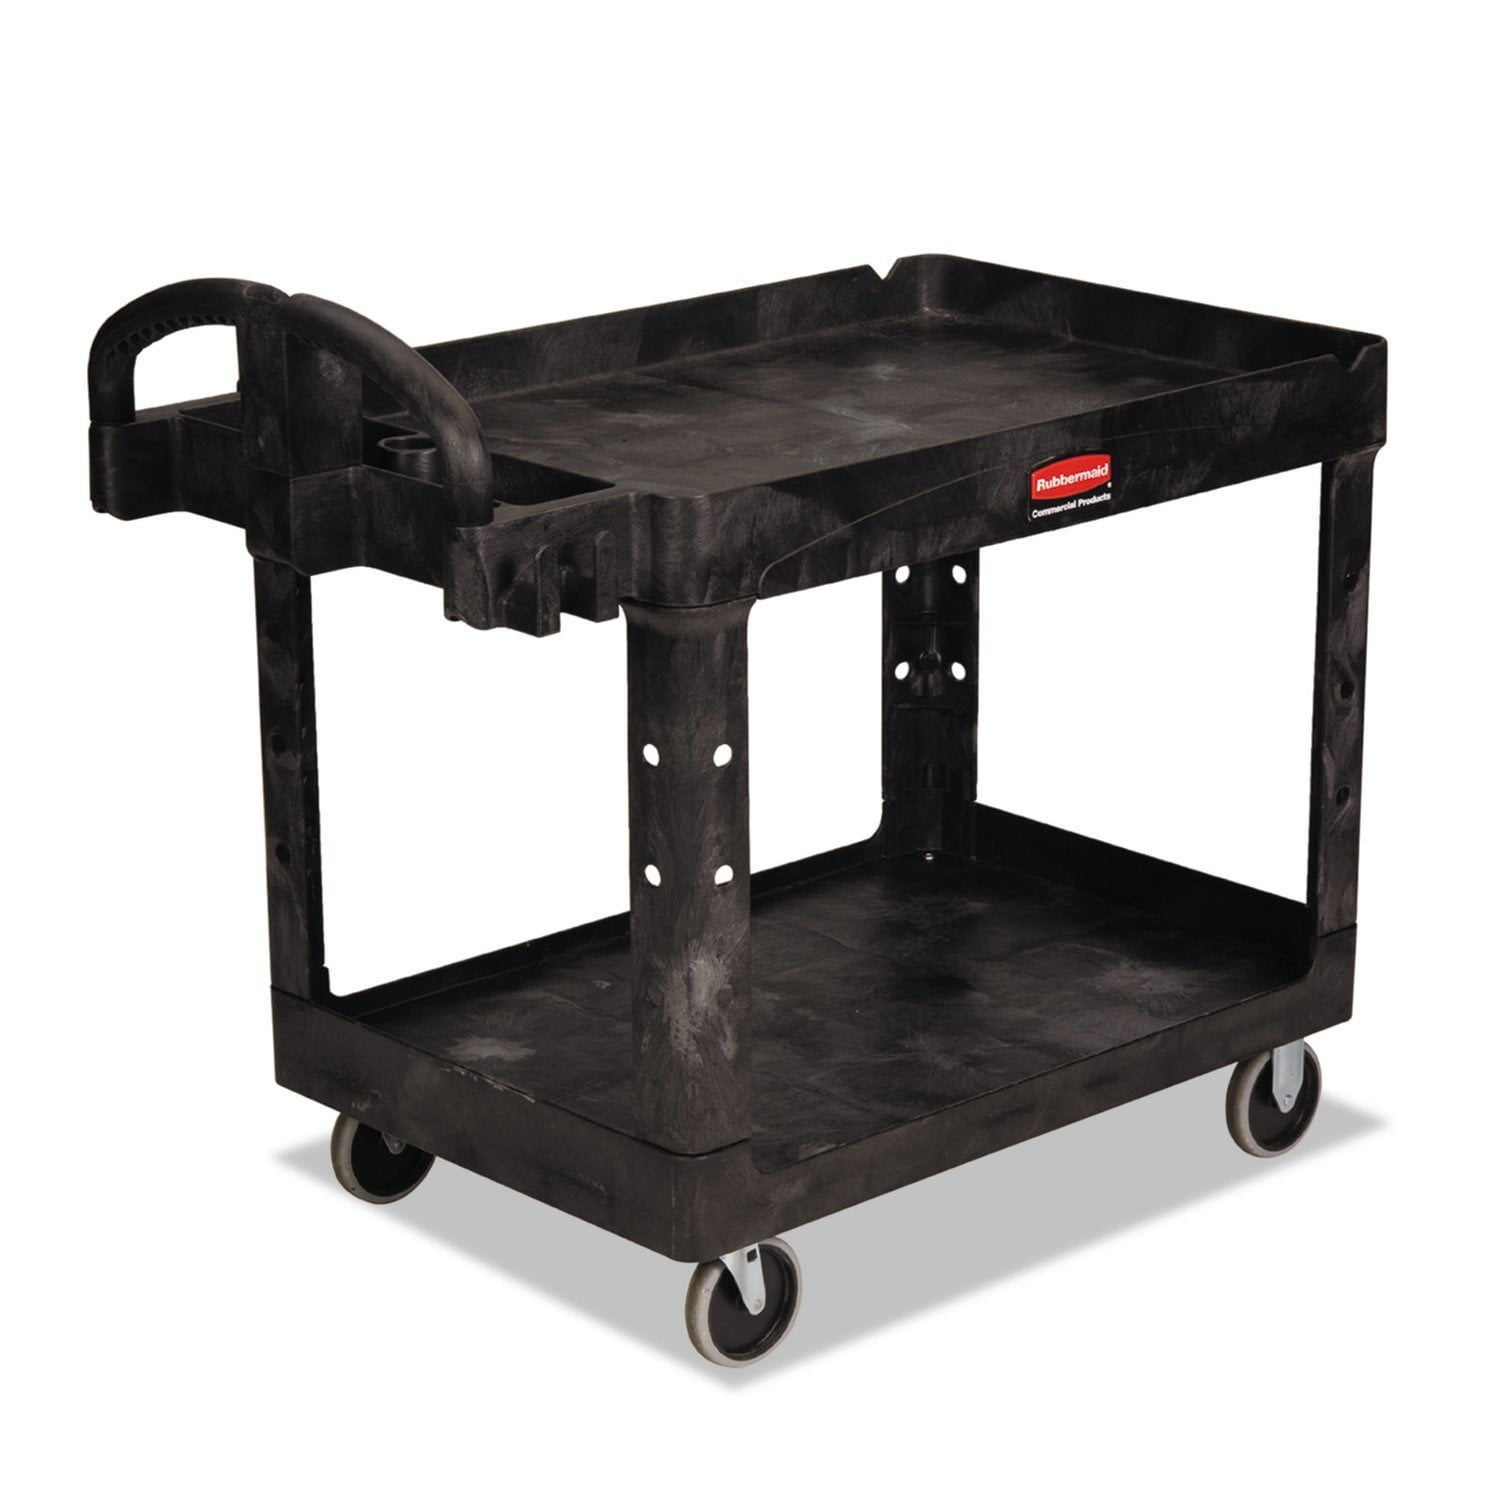 Rubbermaid™ Heavy-Duty Utility Cart with Aluminum Uprights